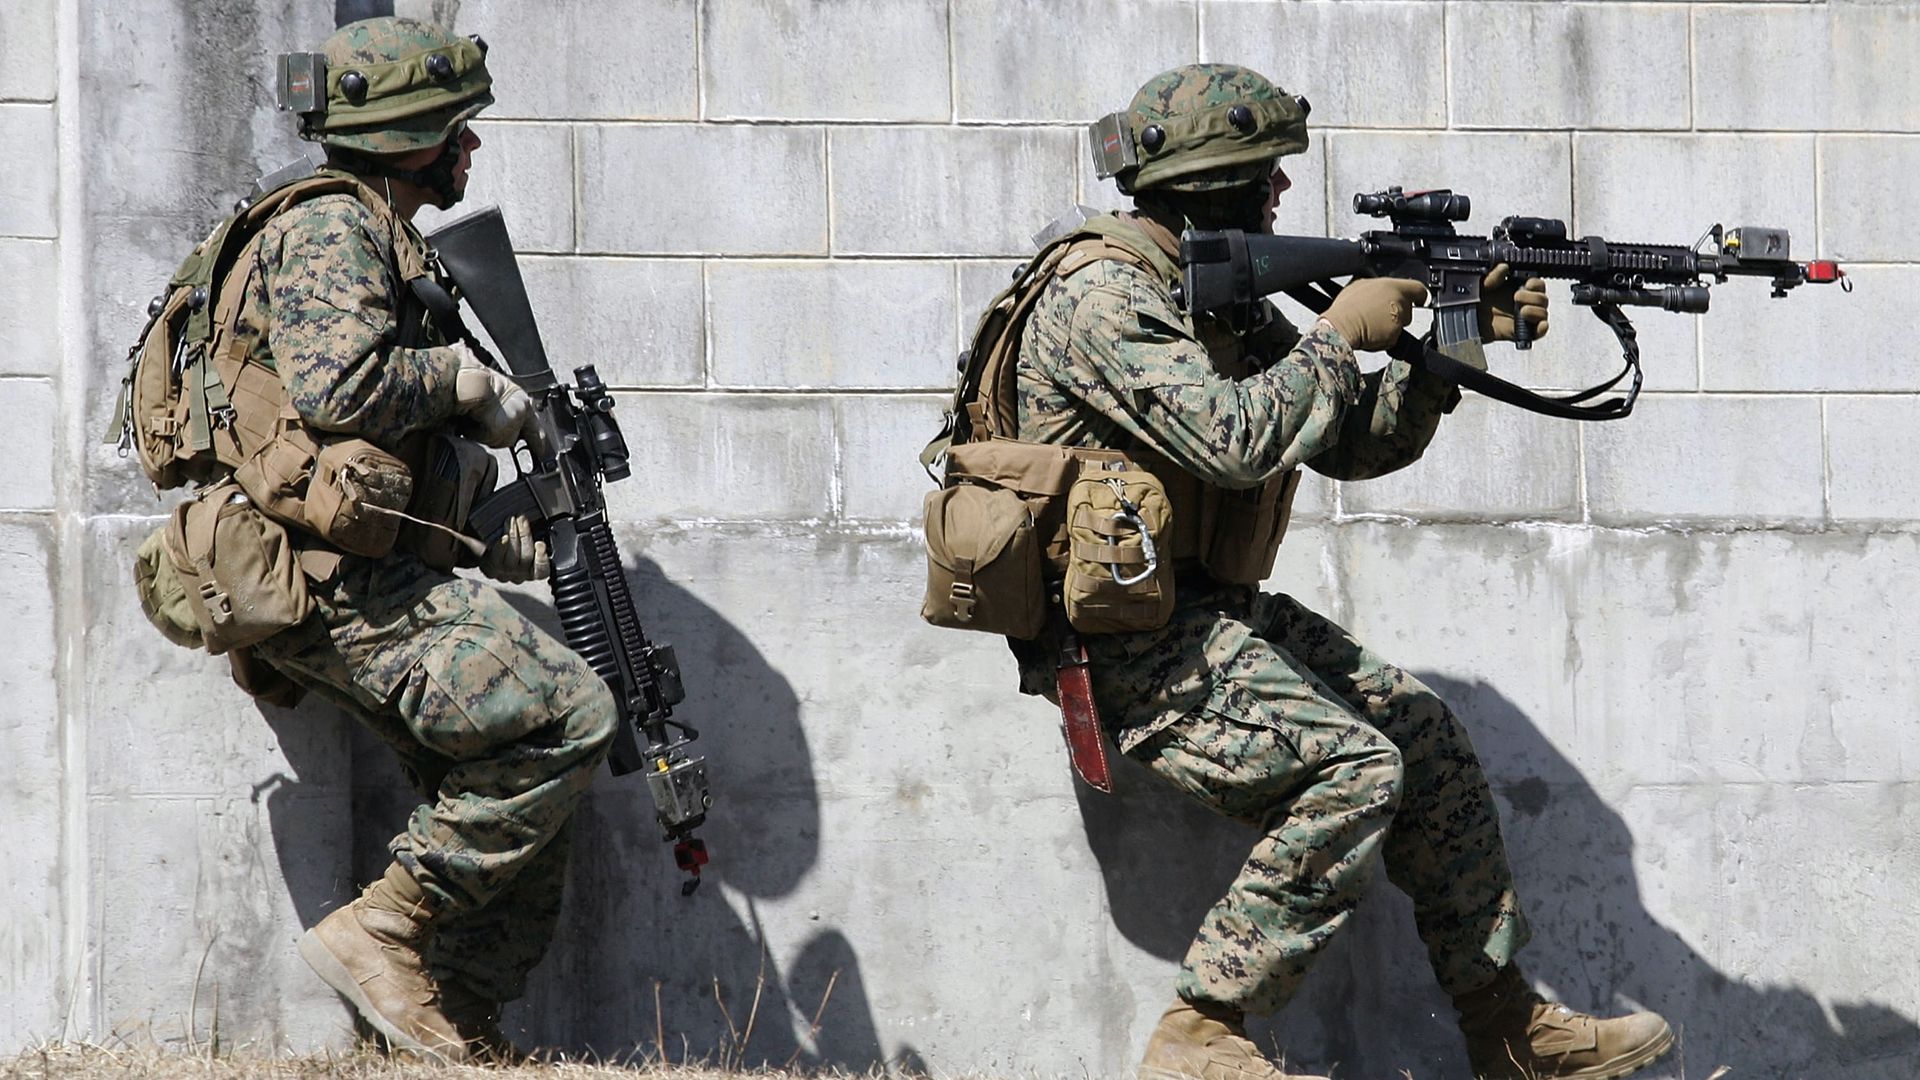 U.S Marine Corps officers participate in military exercise.